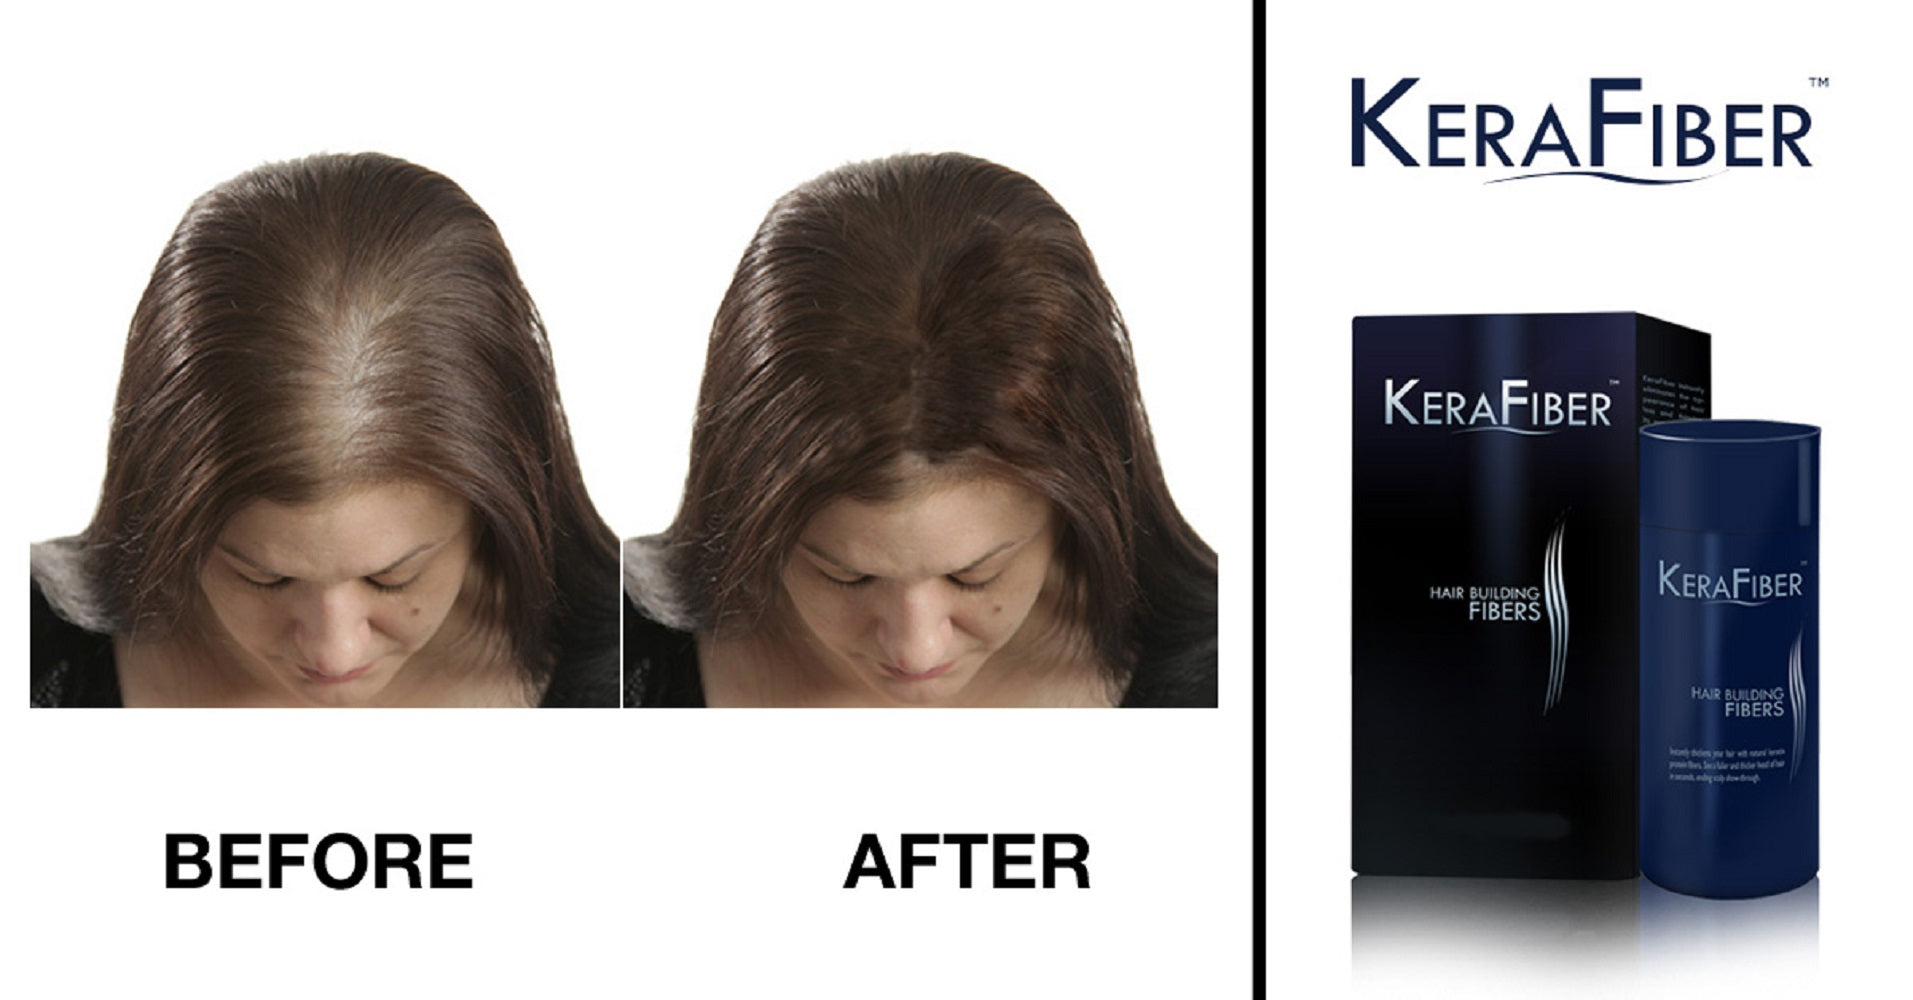 KeraFiber hair building fibers before and after shown on a woman with thinning hair.